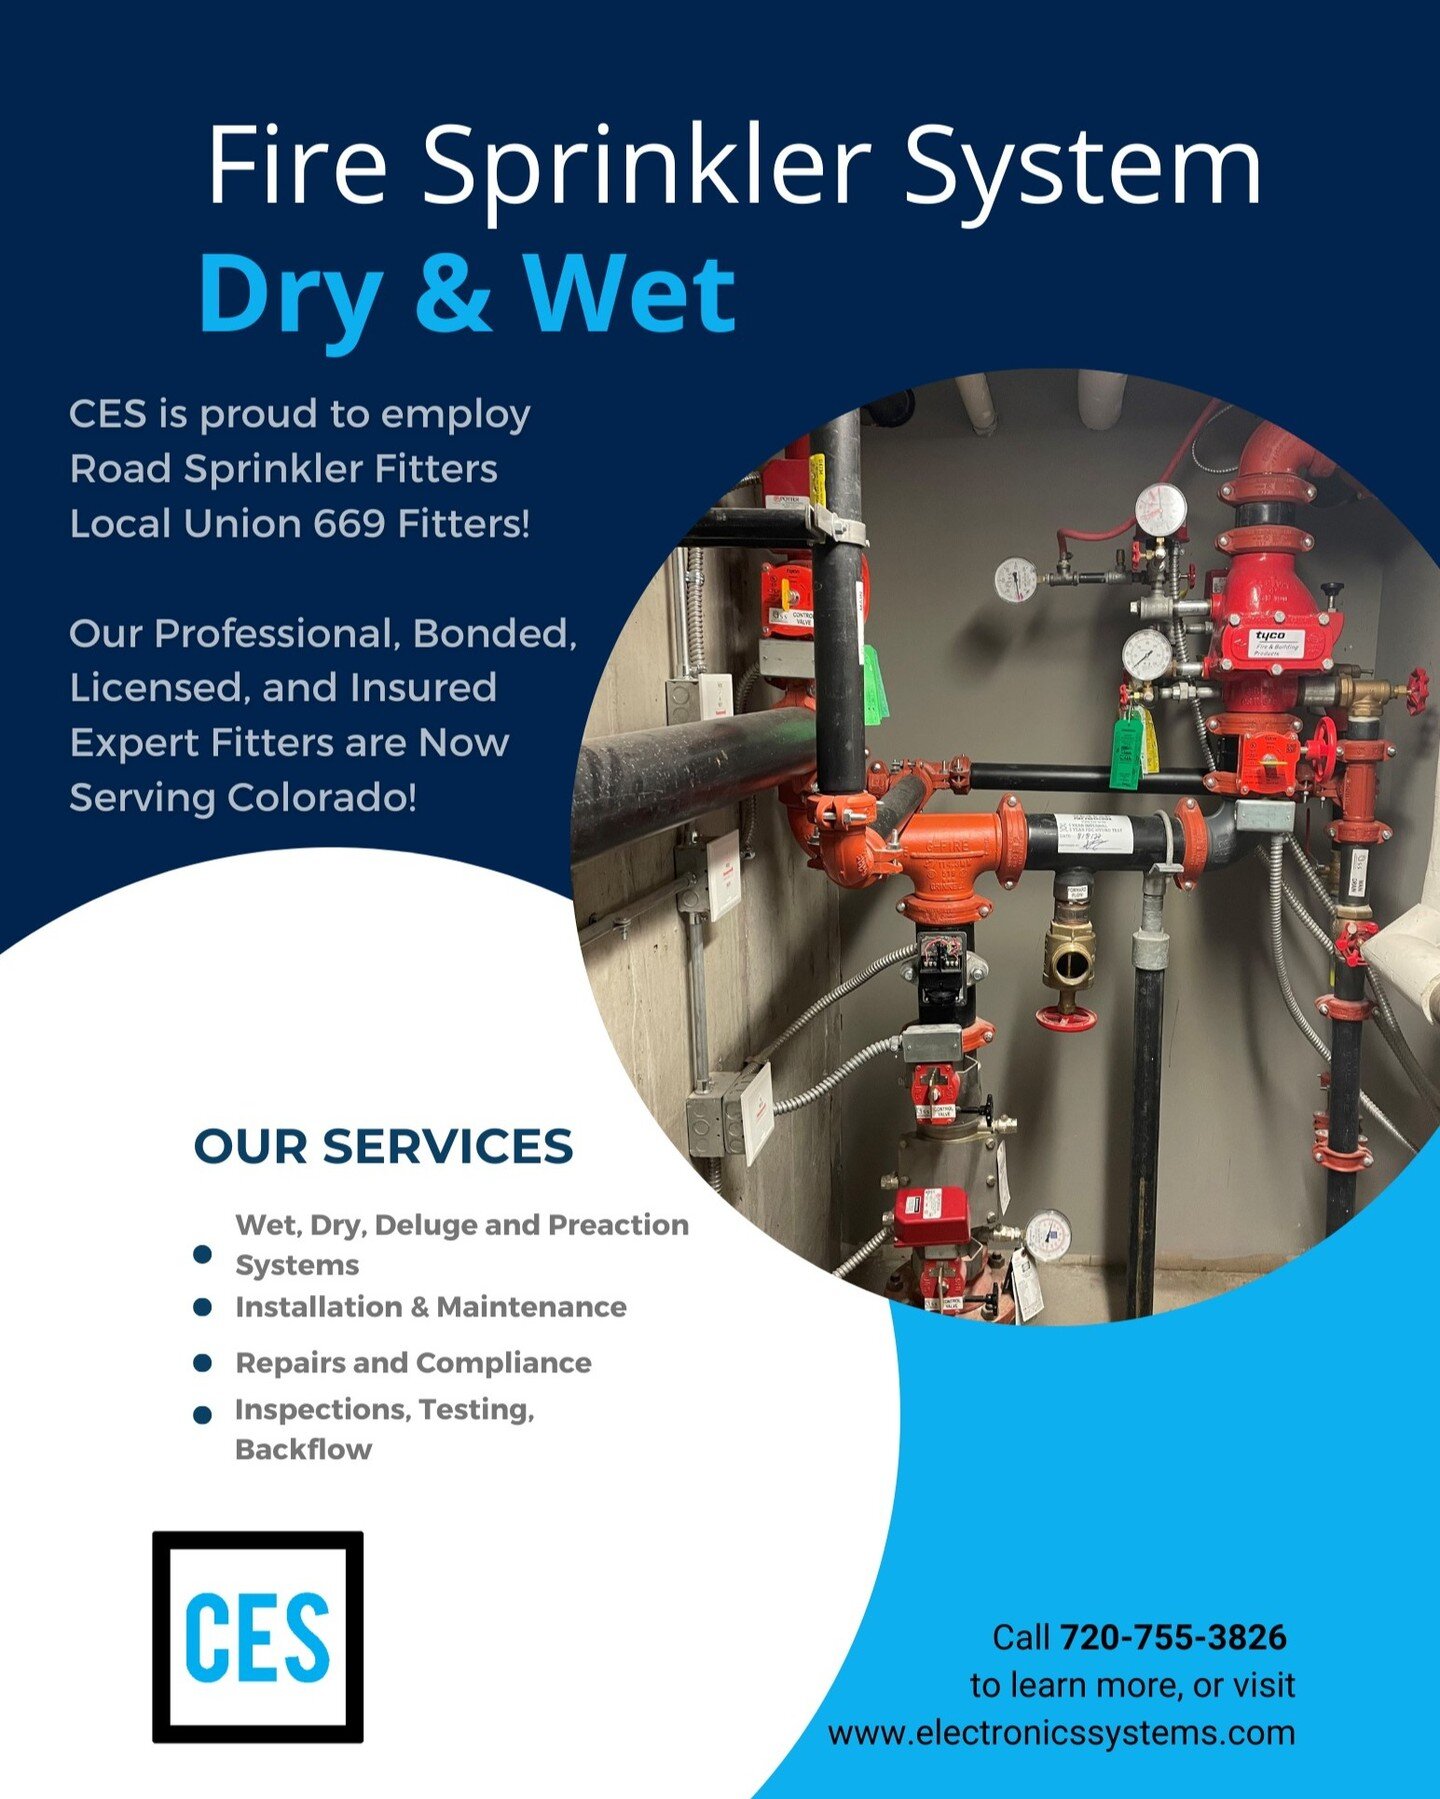 CES is proud to be offering sprinkler services now! #union #sprinklerfitters #sprinklerservice #Colorado
#Coloradofiresafety 
https://electronicssystems.com